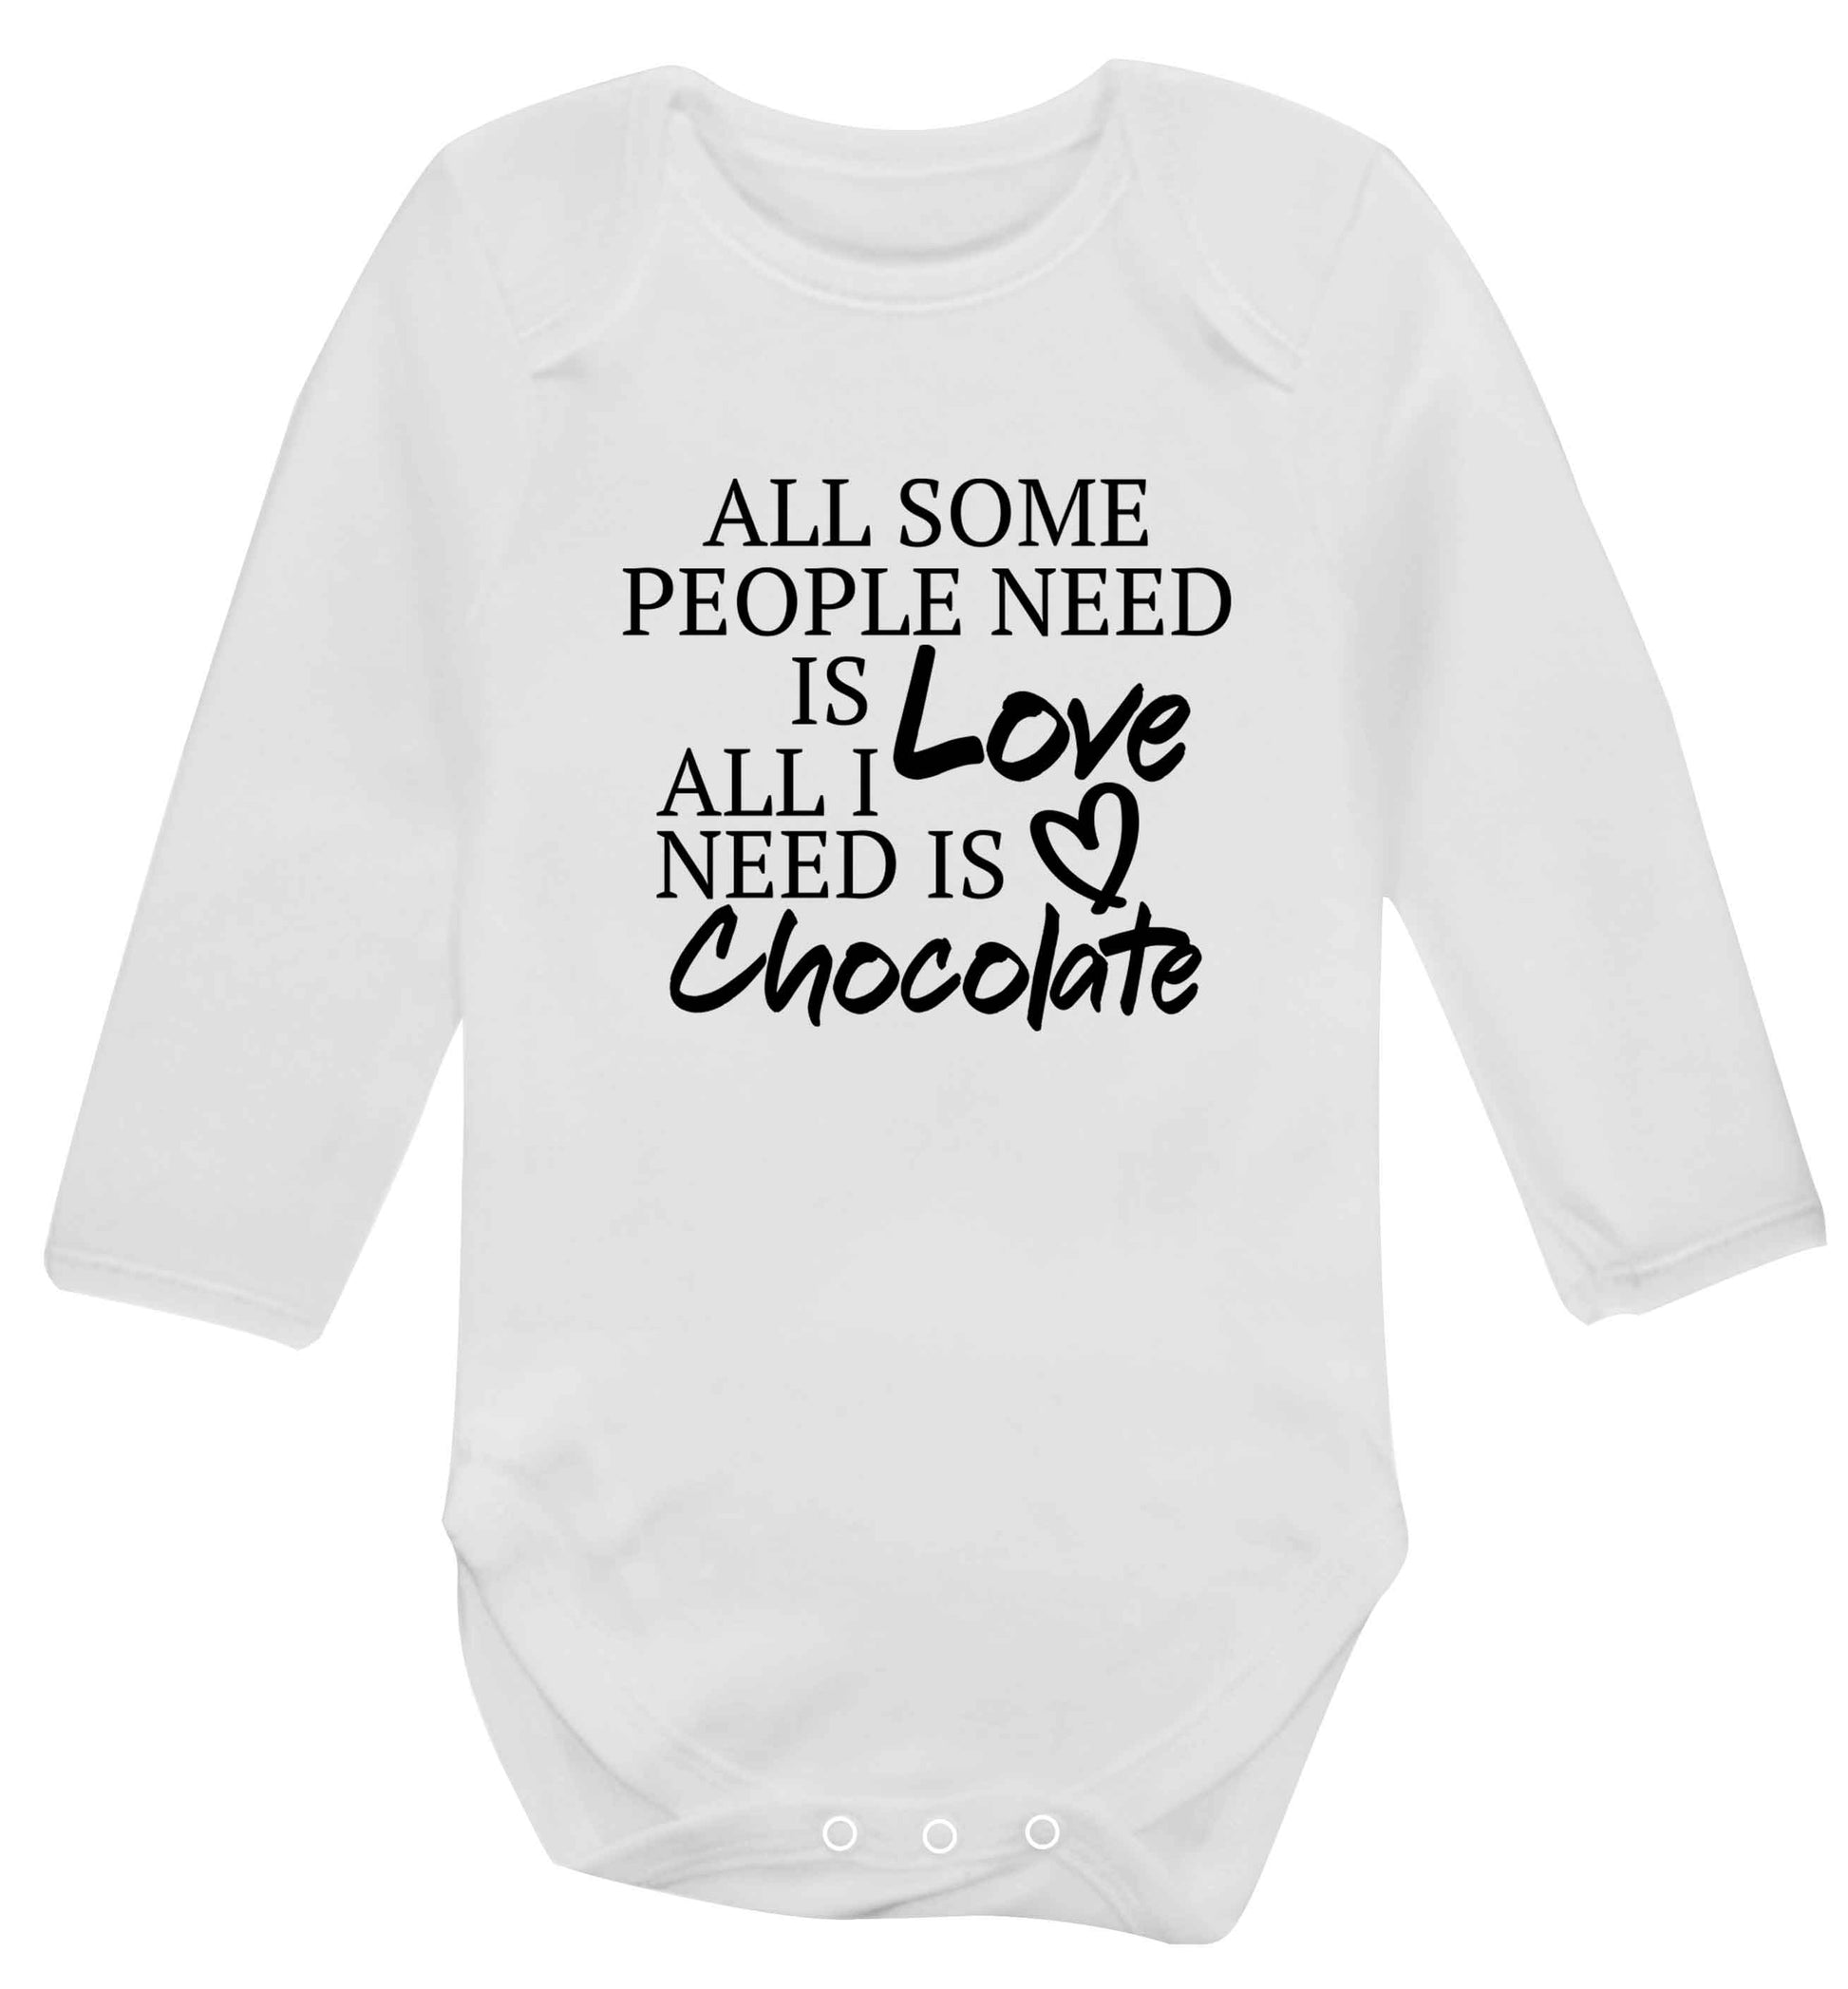 All some people need is love all I need is chocolate baby vest long sleeved white 6-12 months